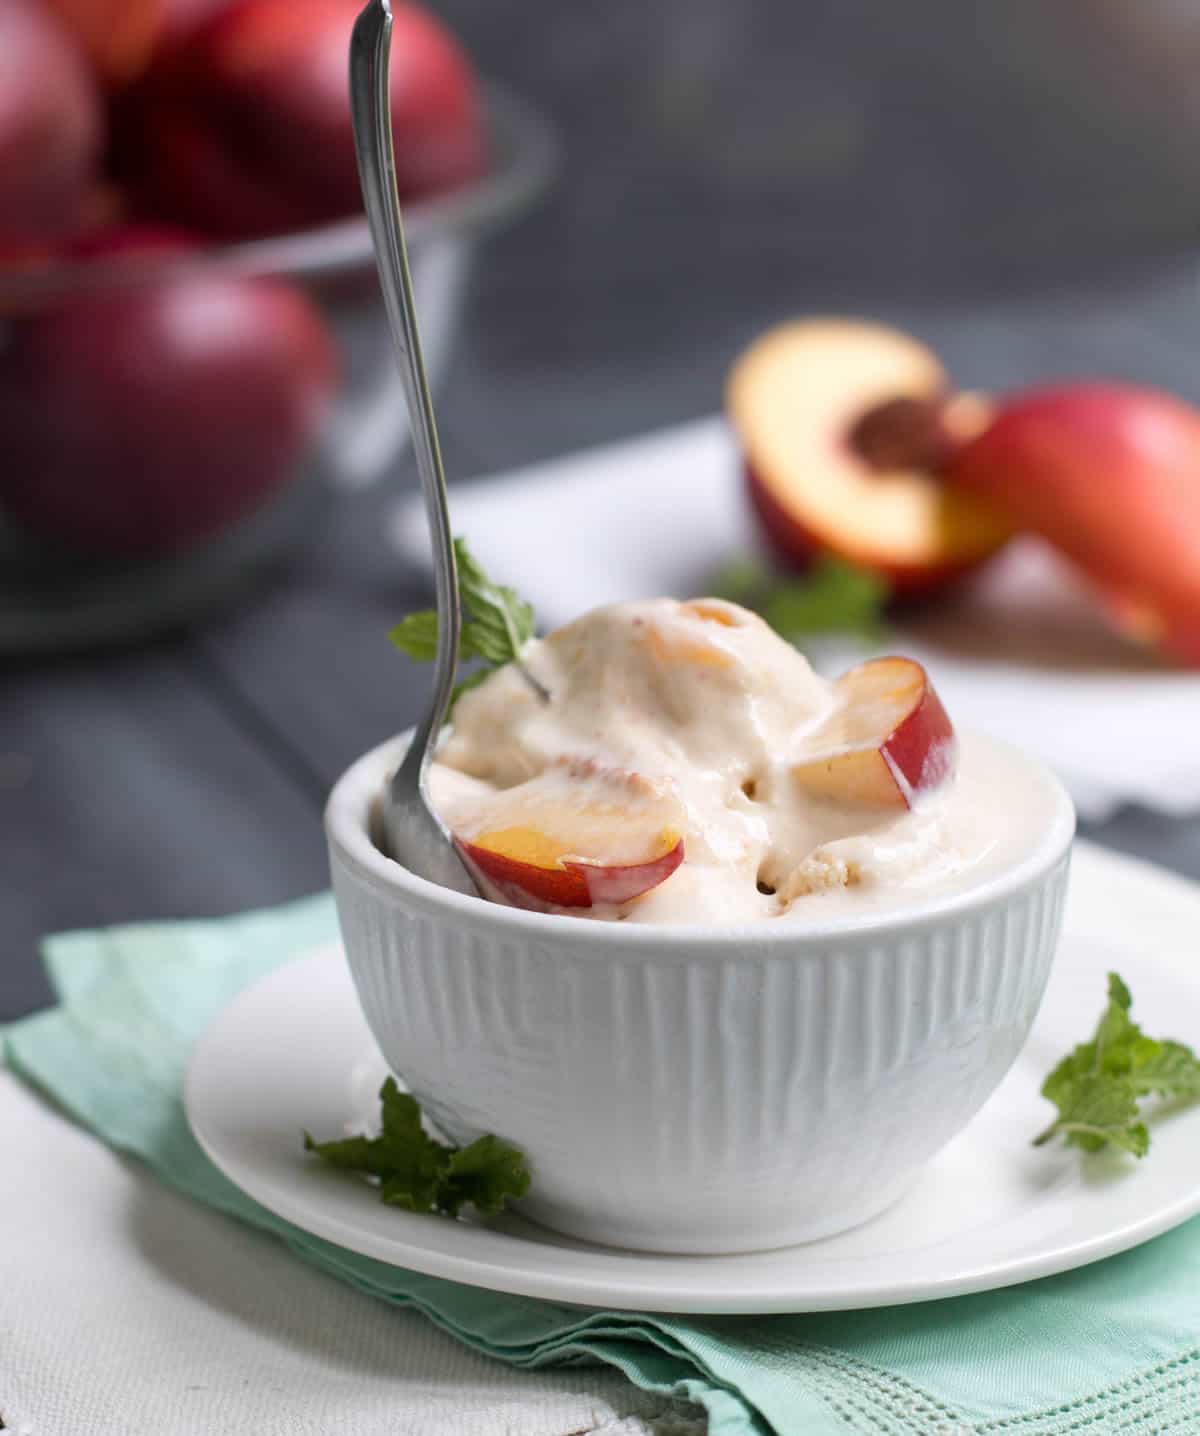 No Churn Nectarine Ice Cream. If you can whip cream, you can make ice cream! Fresh fruit and just three ingredients make this delicious frozen treat!